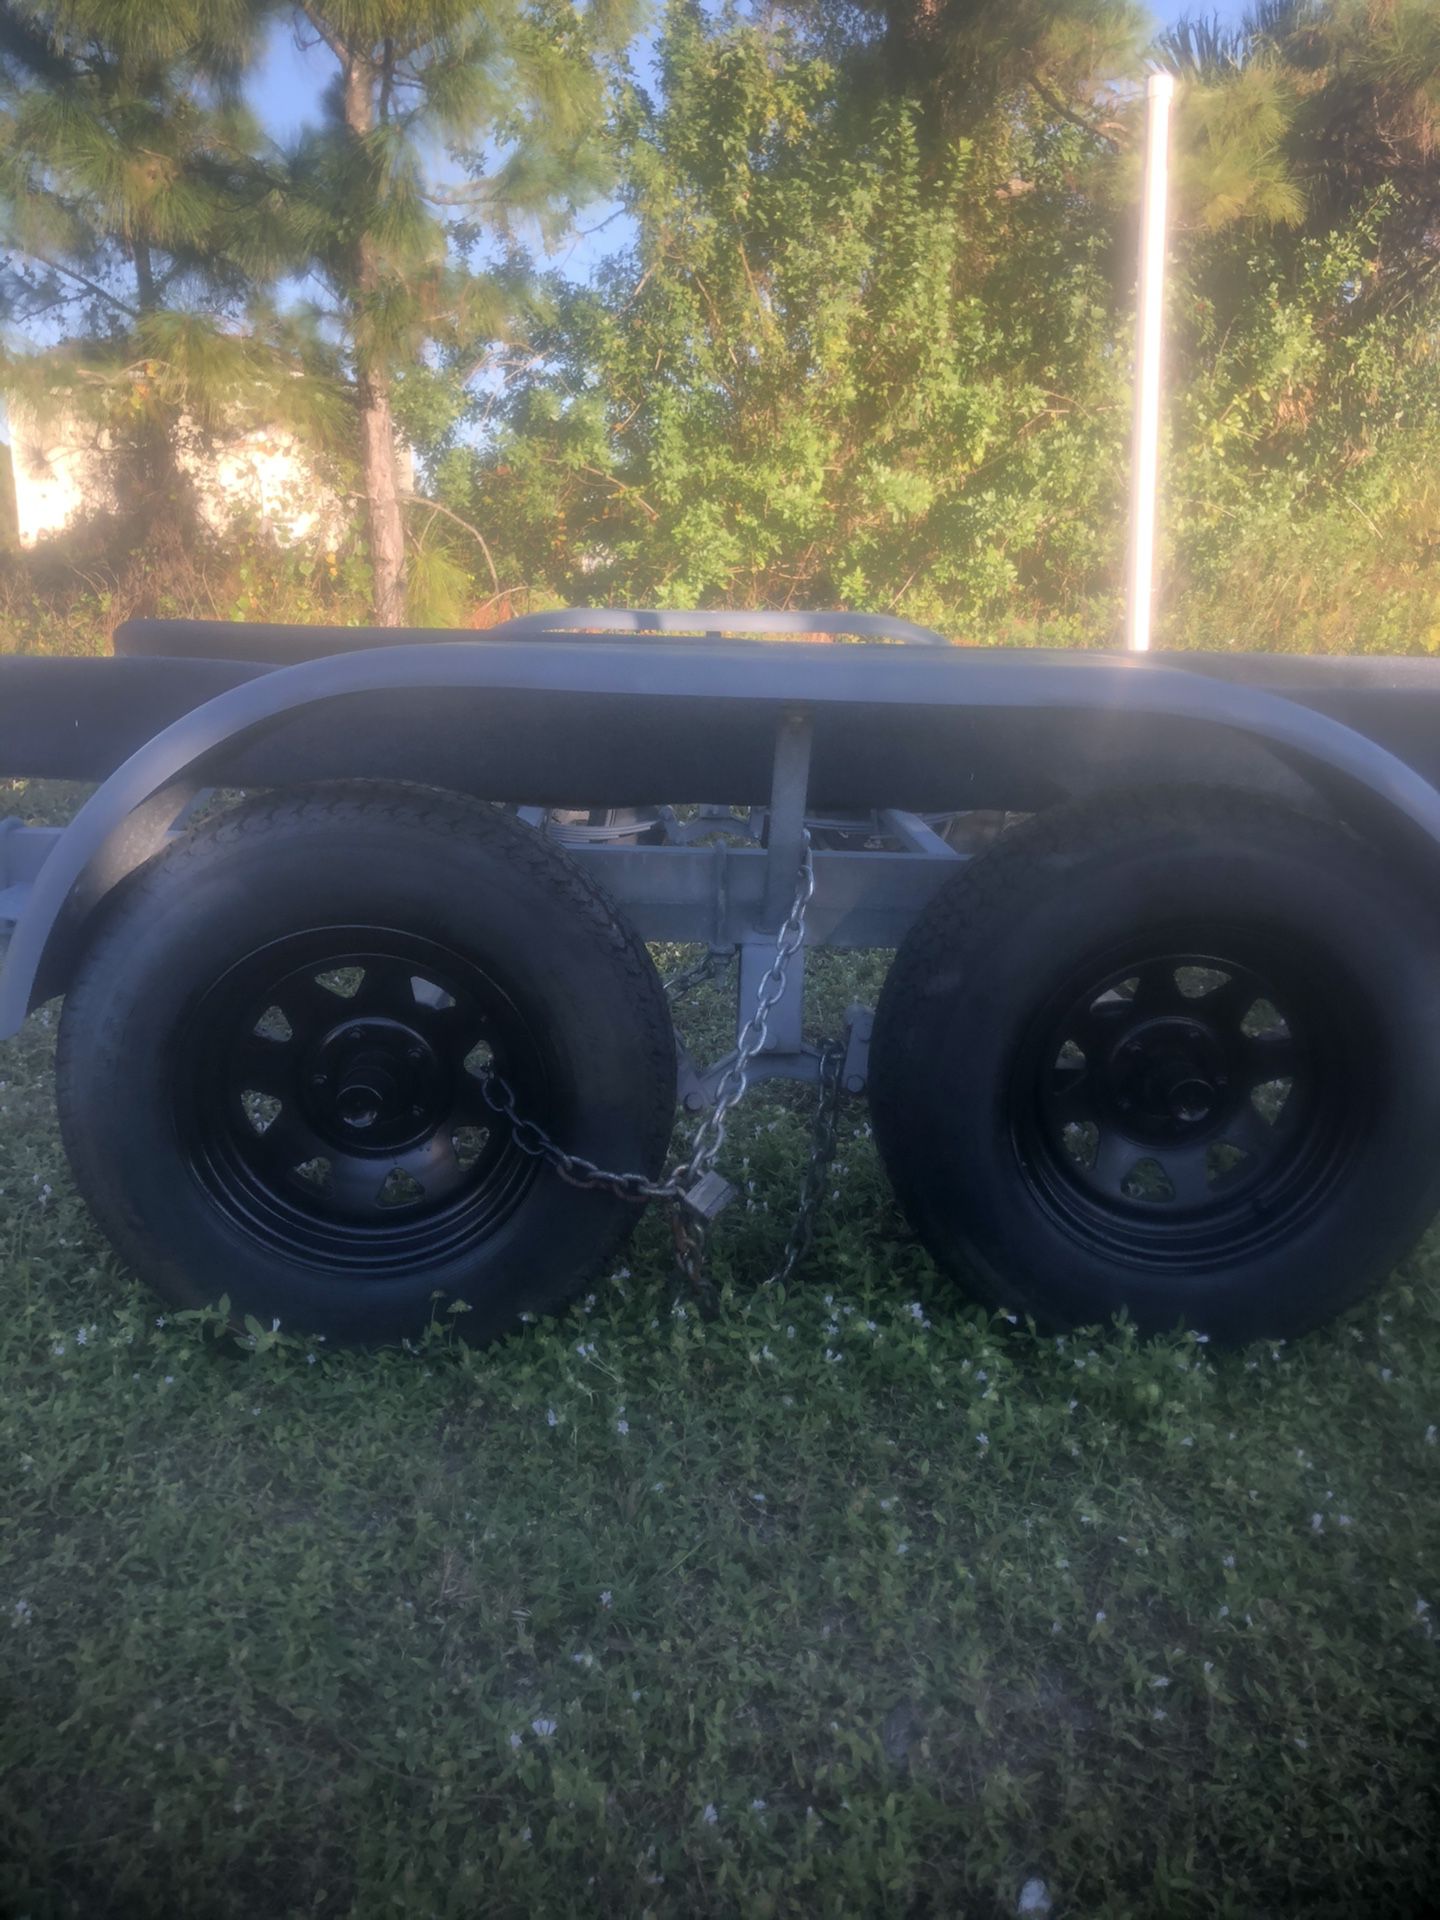 Trailer magic 98 Fron 20 to 24 feet used trailer new tires and good condition 1,350 $